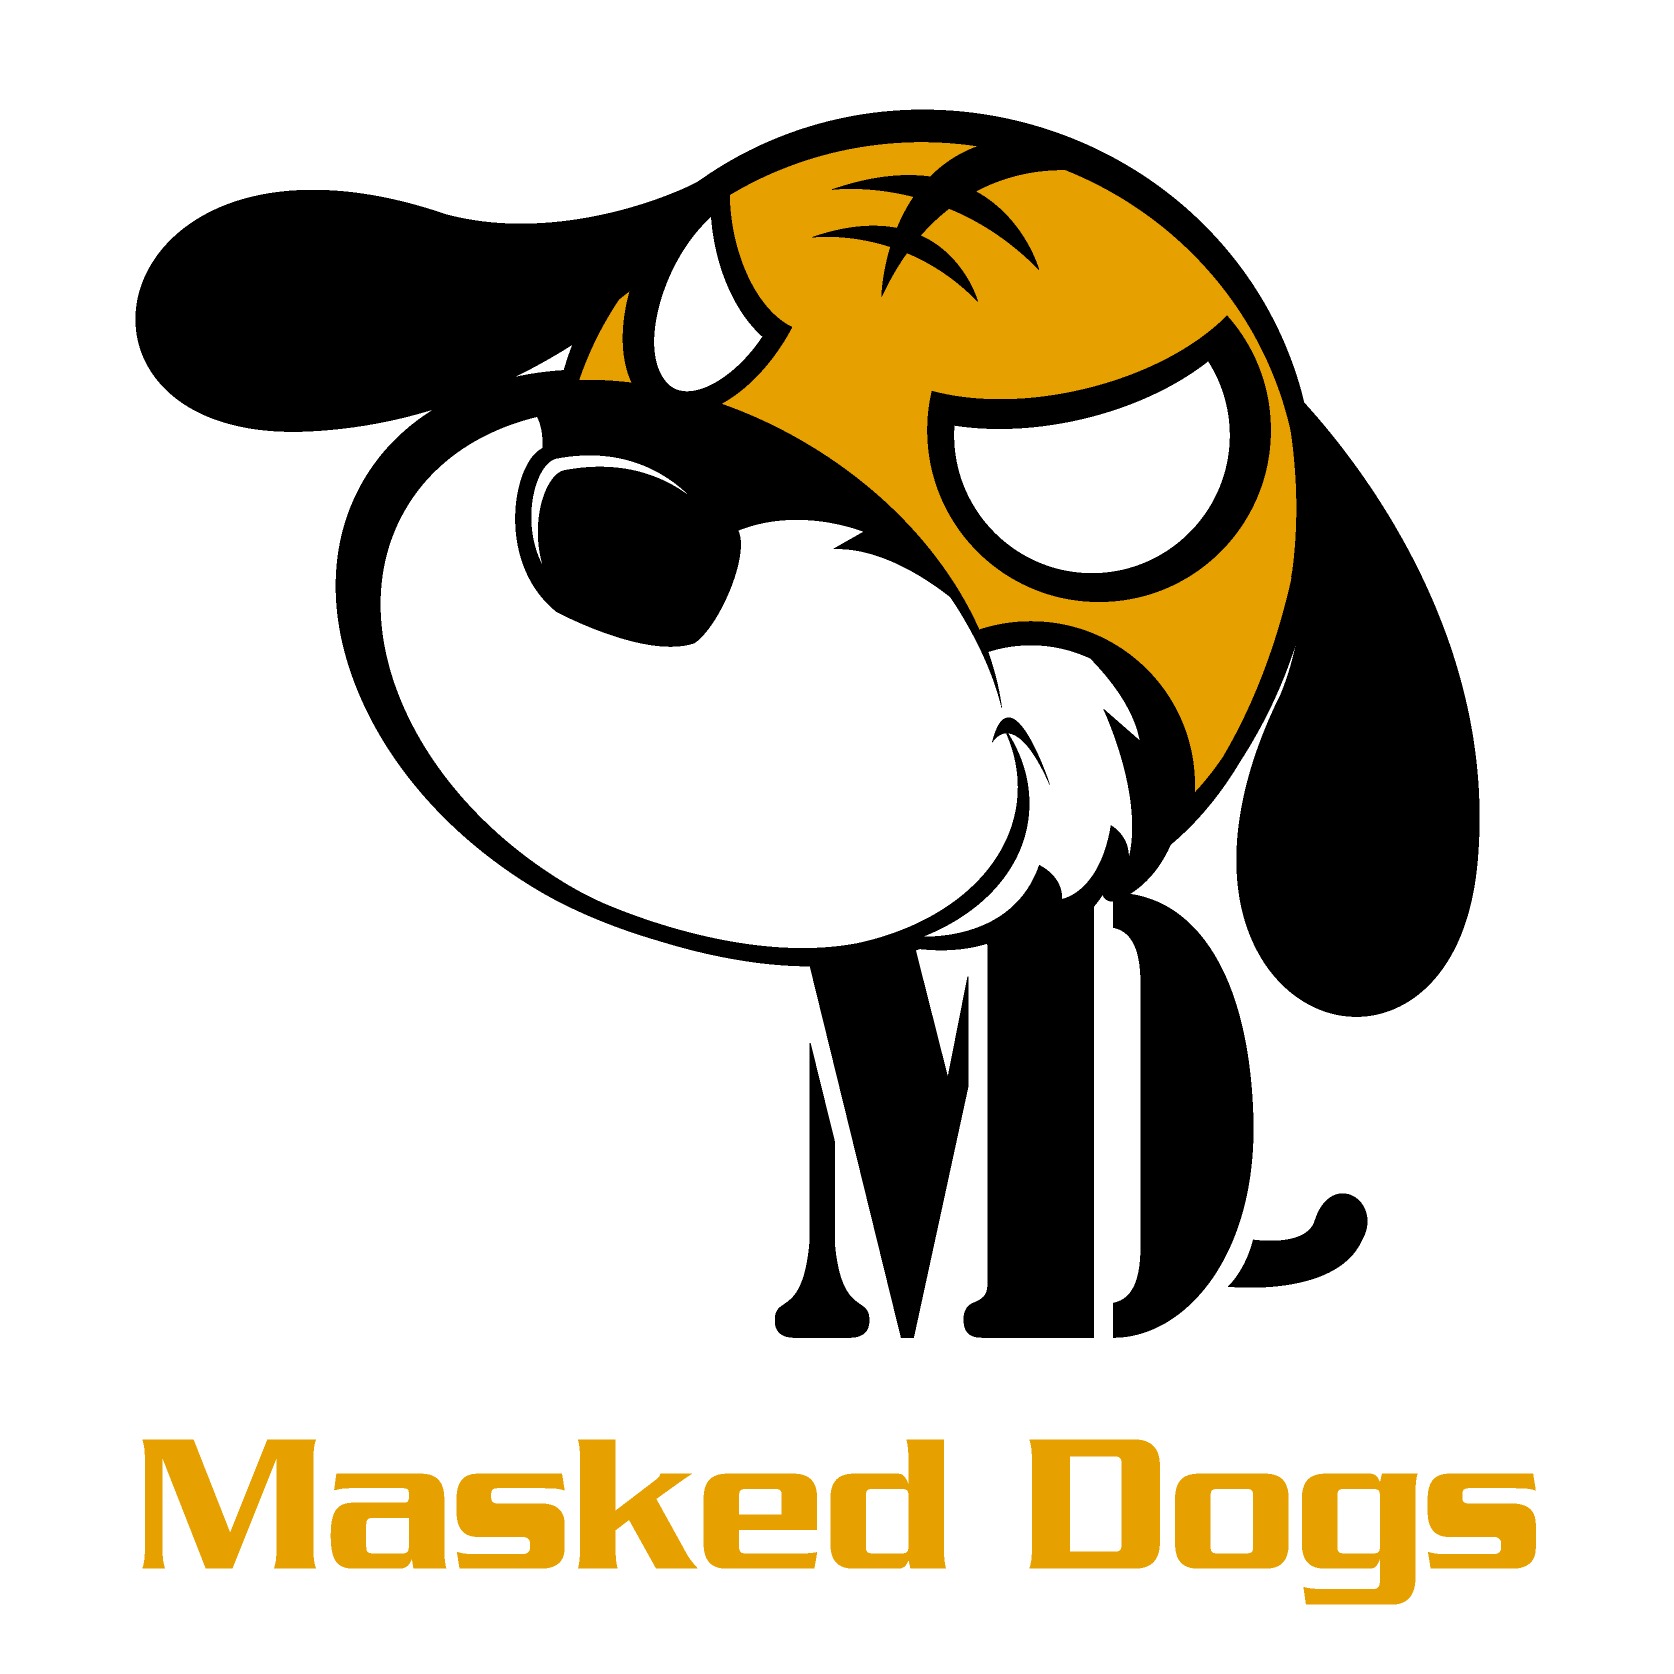 Masked Dogs